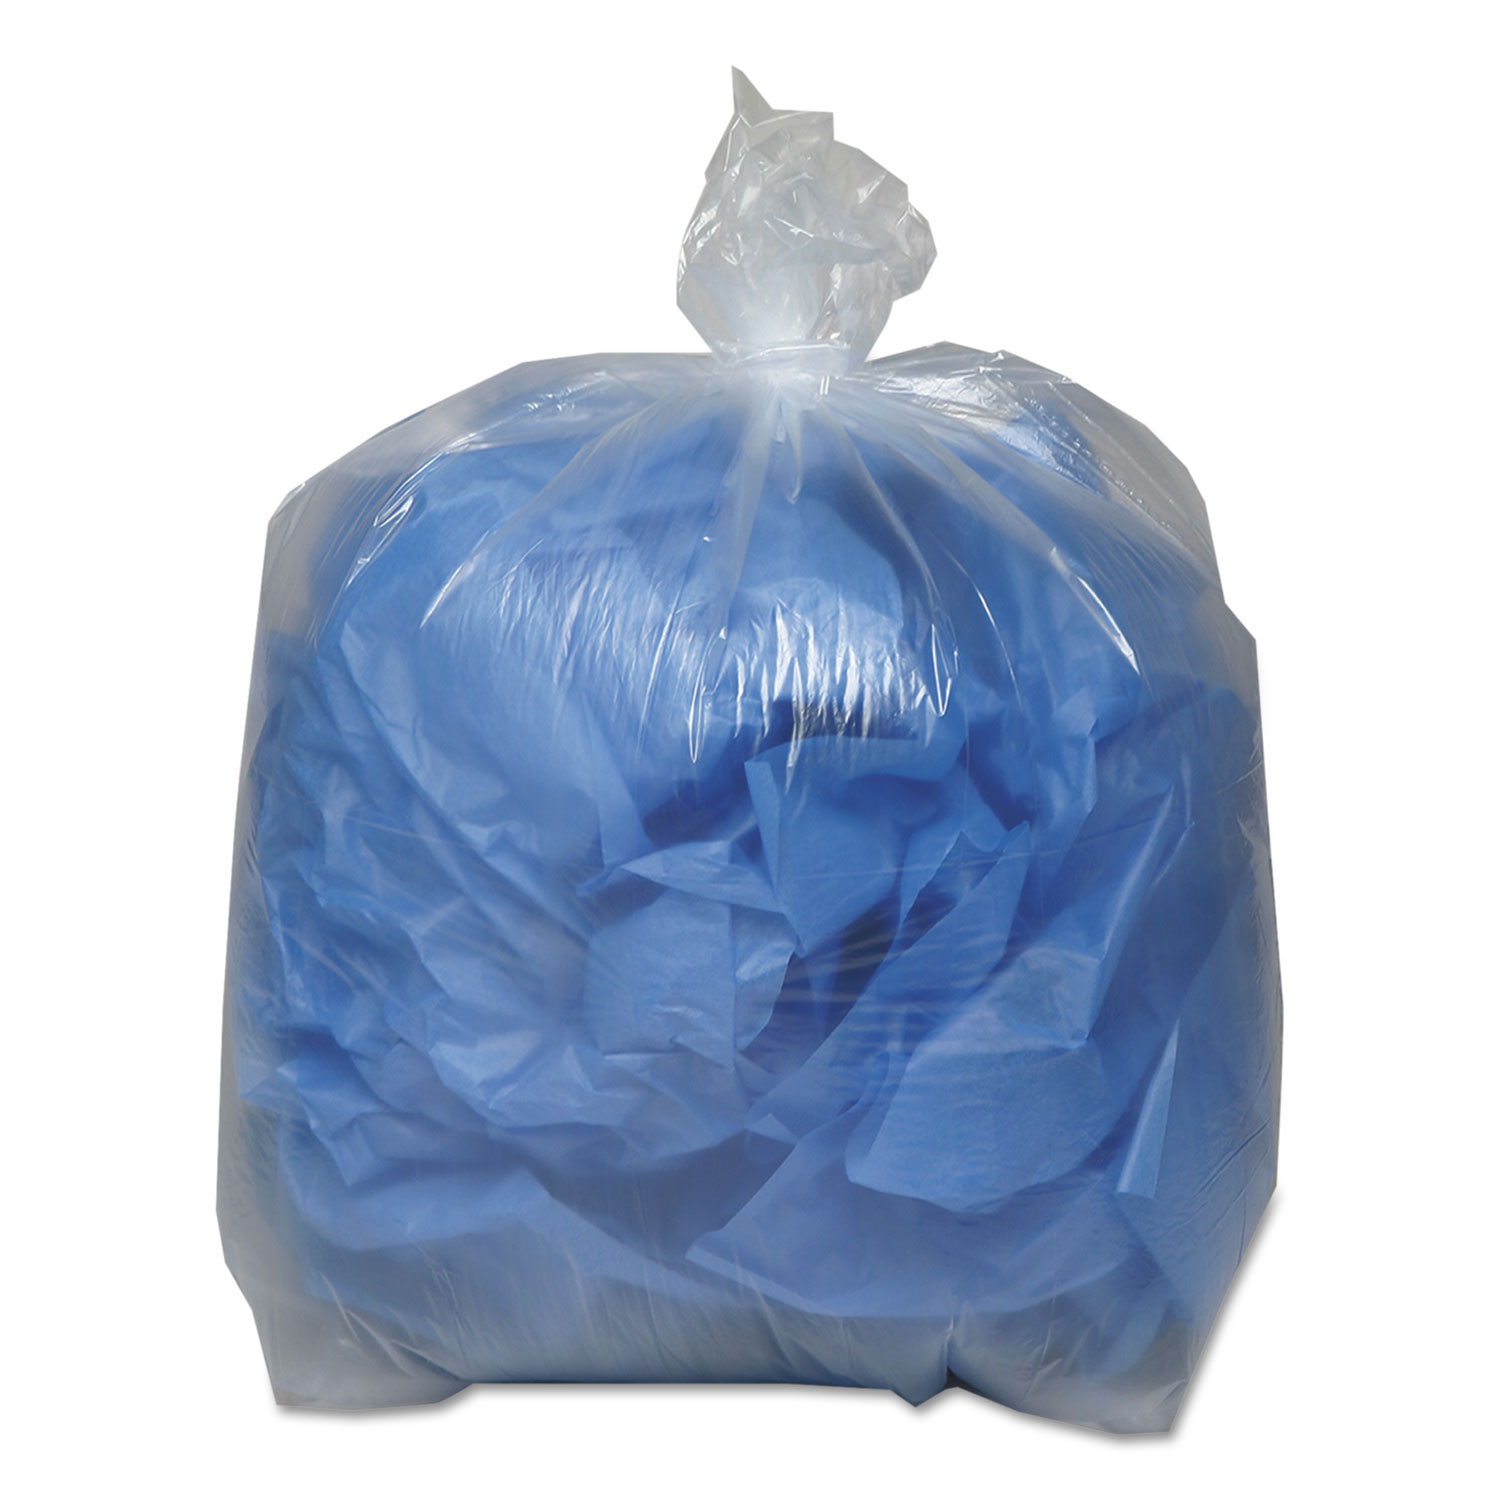 Low Density Repro Can Liners, 1.1 Mil, 31-33gal, 33x39, 10 Bags/RL, 10 Roll/CT